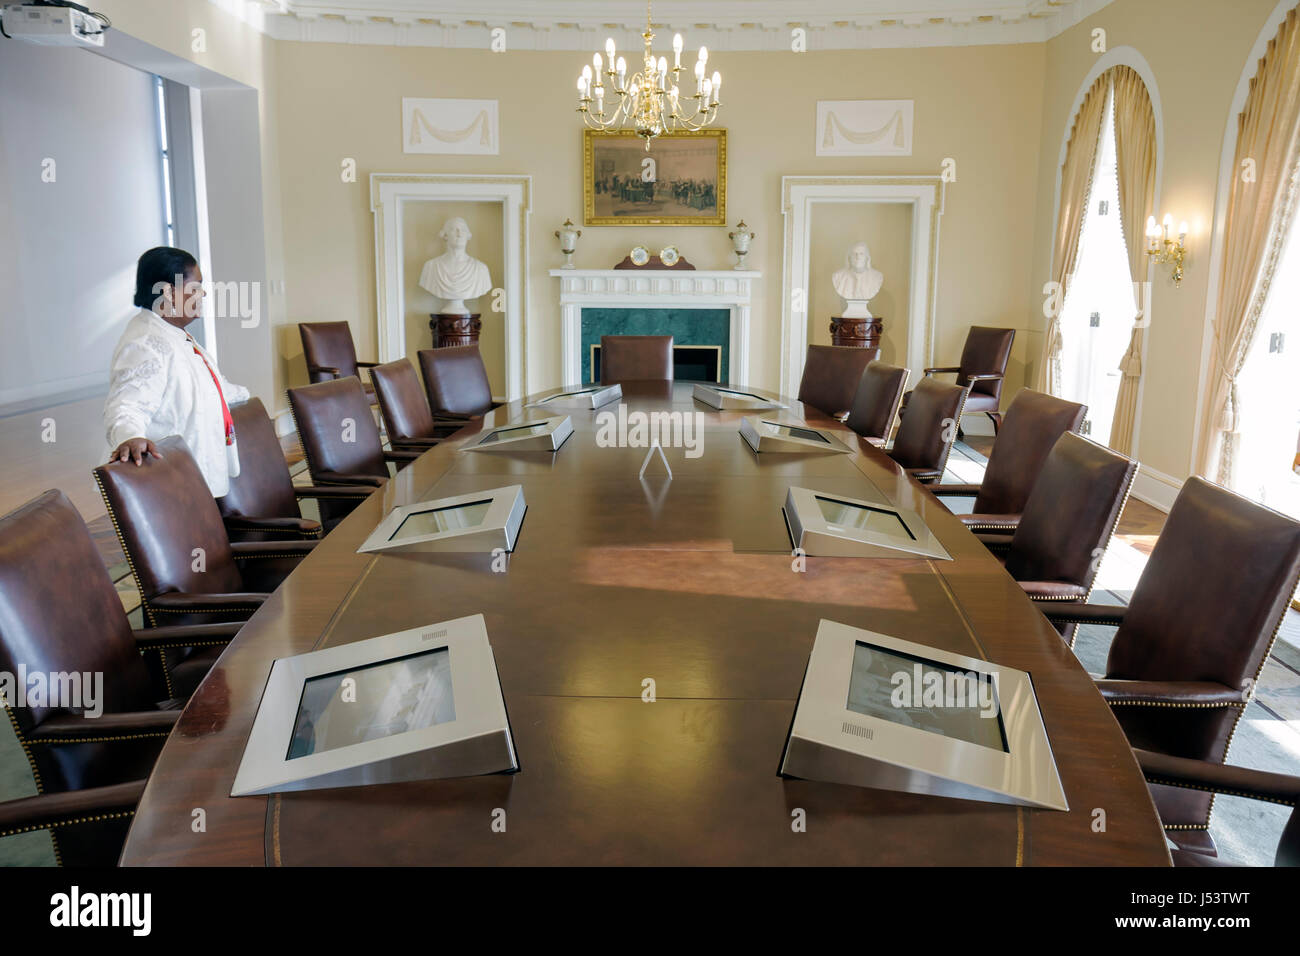 Little Rock Arkansas,William J. Clinton Presidential Library,full scale replica Cabinet Room,Black Blacks African Africans ethnic minority,adult adult Stock Photo